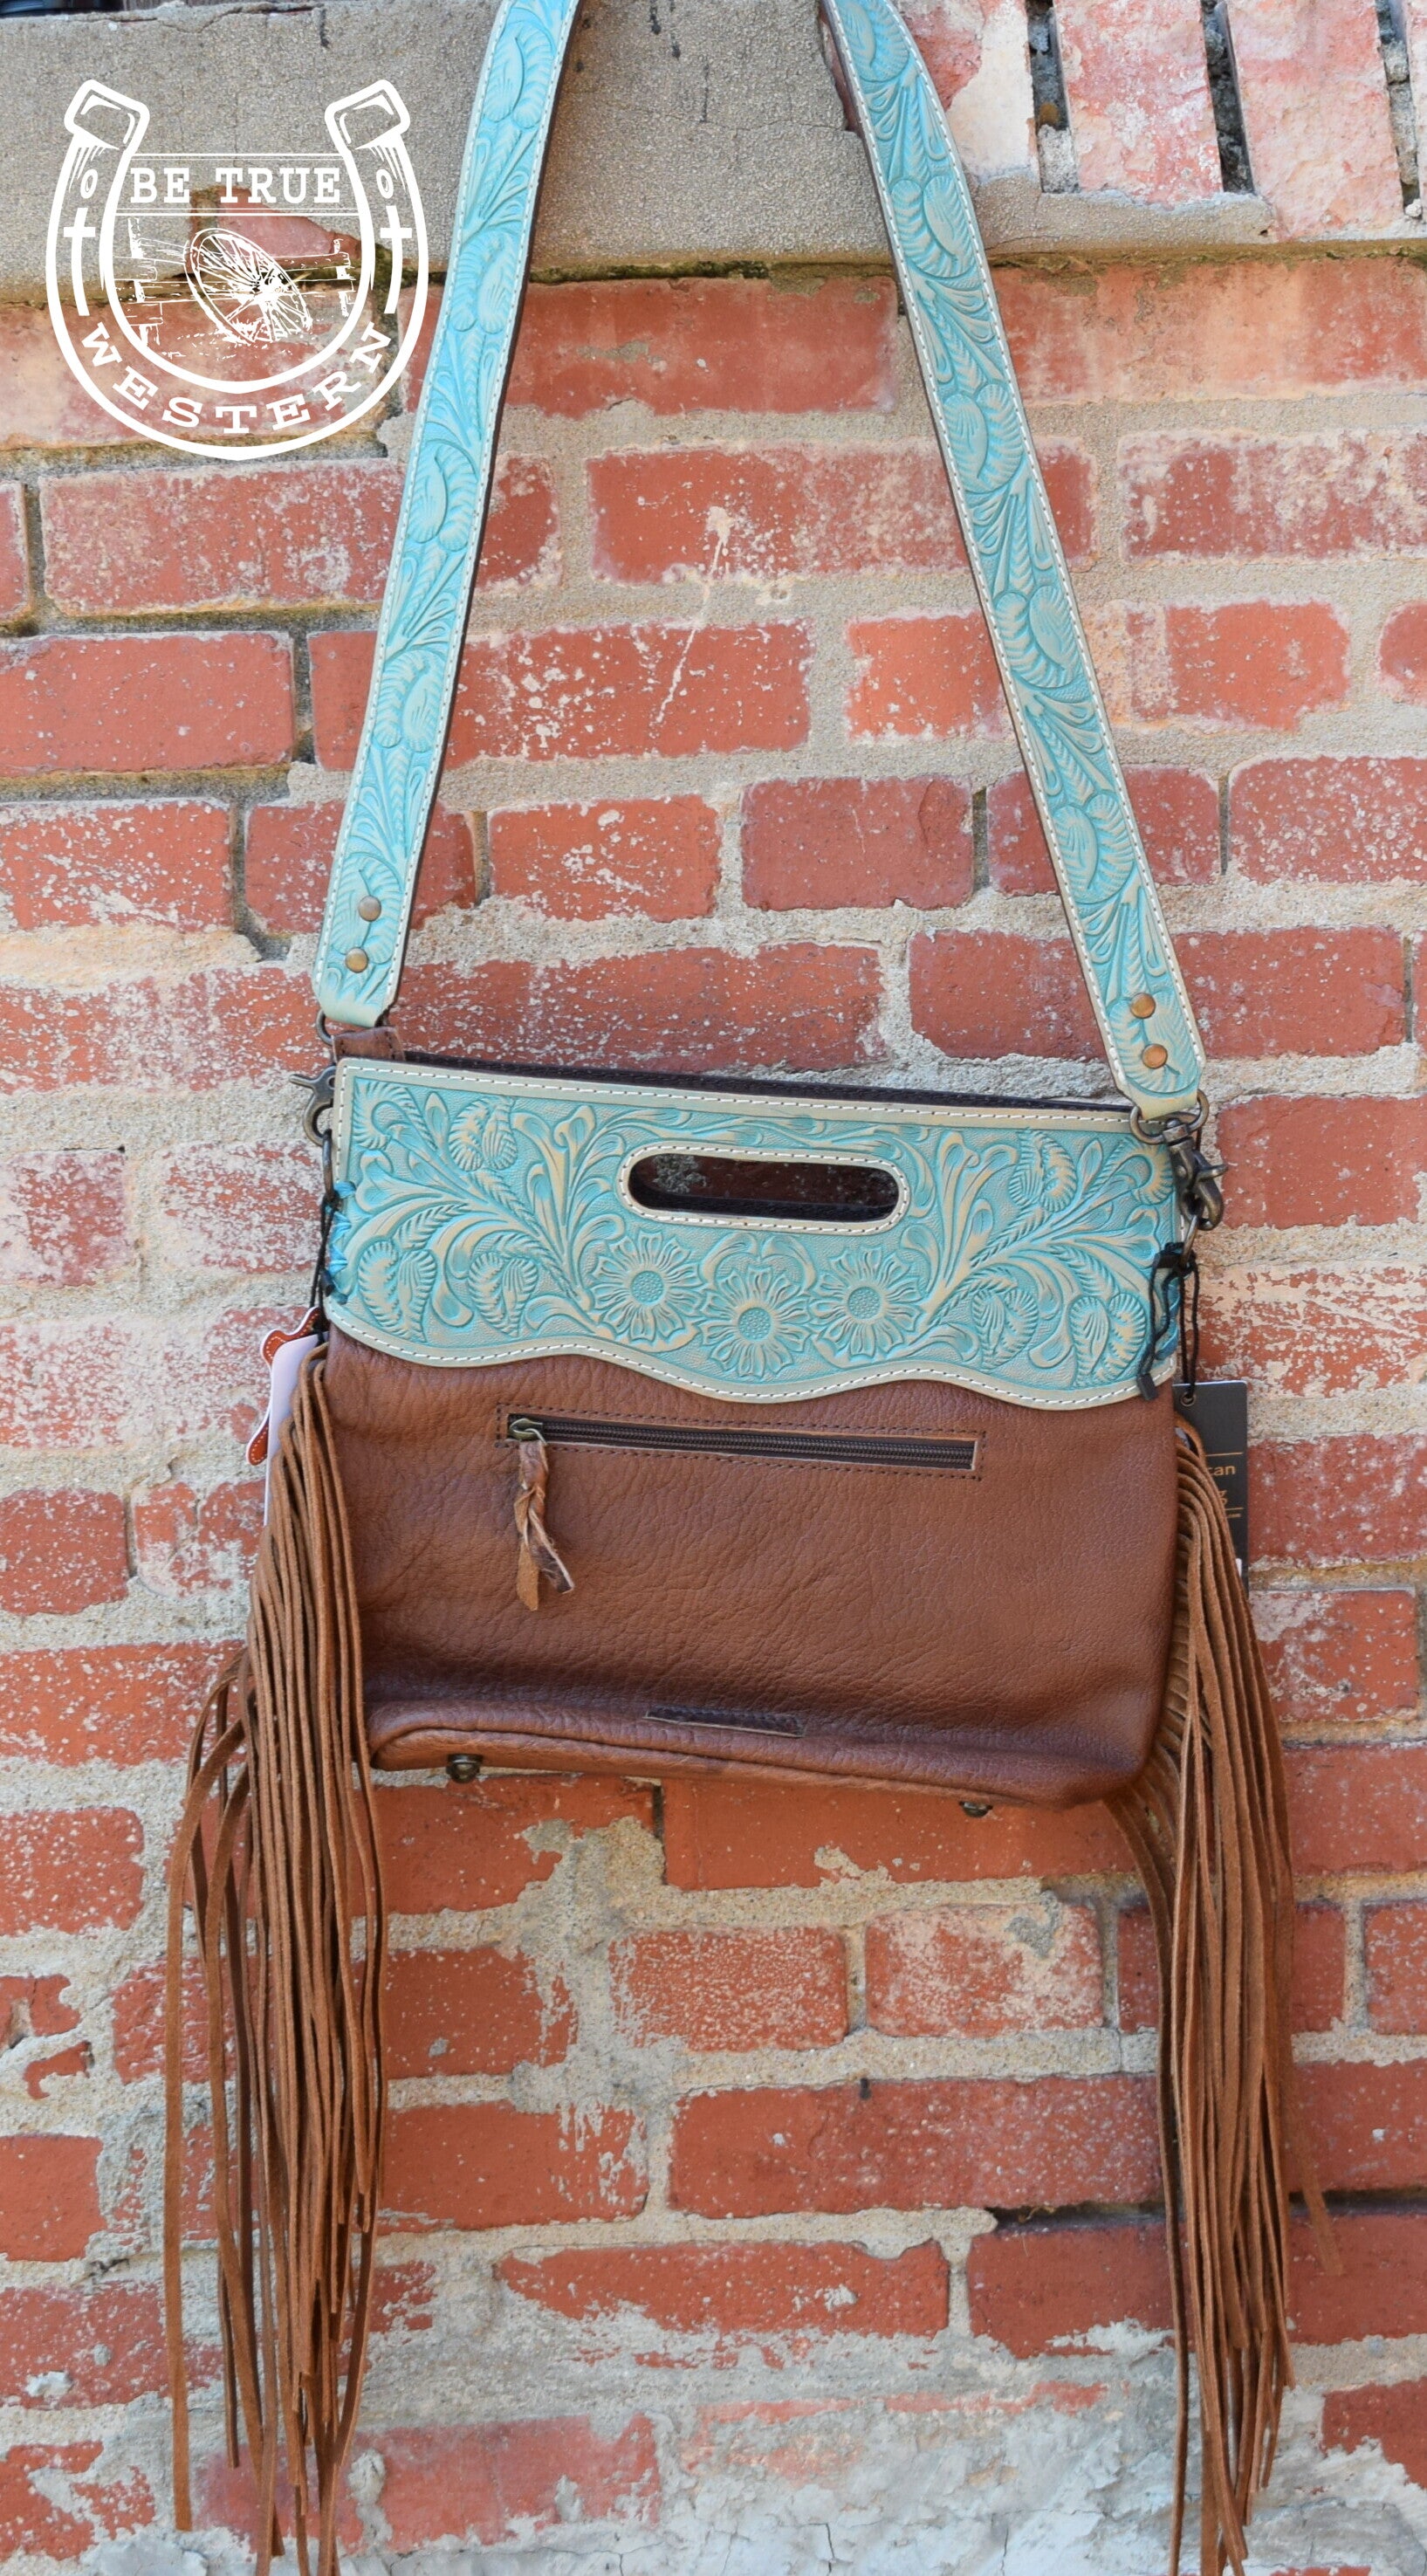 Leather Crossbody Bag, Turquoise Bag Womens, Mint Leather Purse, Hot Tooled  Leather, Shoulder Leather Bag, Messenger Bag, Gift for Her - Etsy Ireland